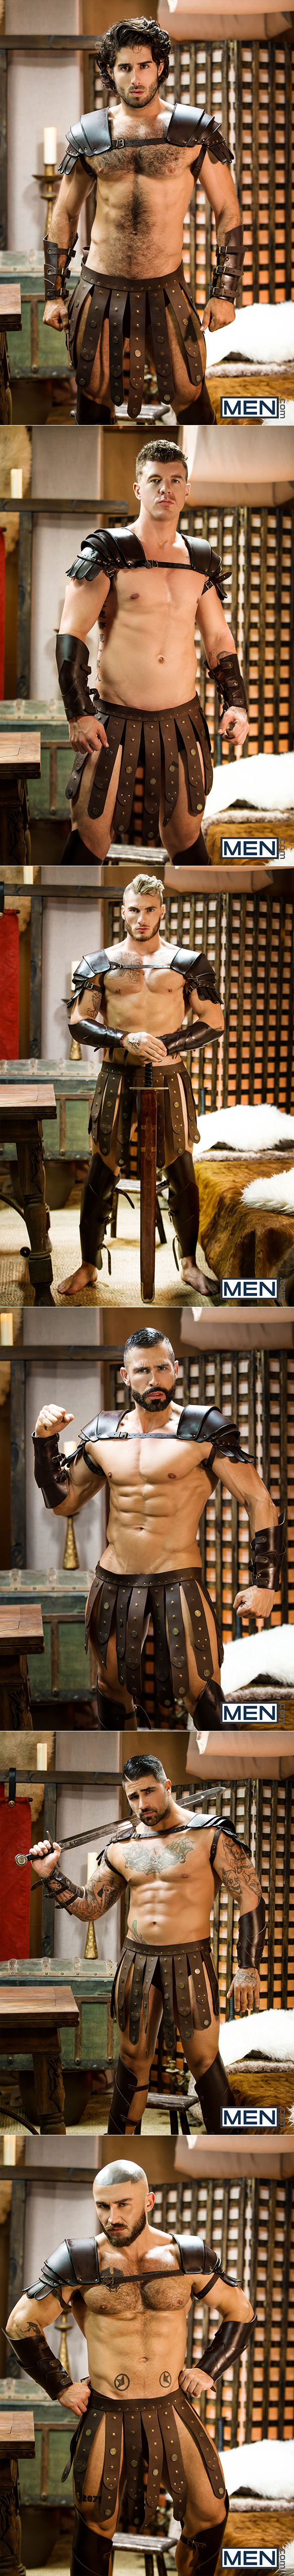 Men.com: William Seed, Diego Sans, François Sagat, JJ Knight, D.O. and Ryan Bones' six-man orgy in "Sacred Band Of Thebes, Part 4"